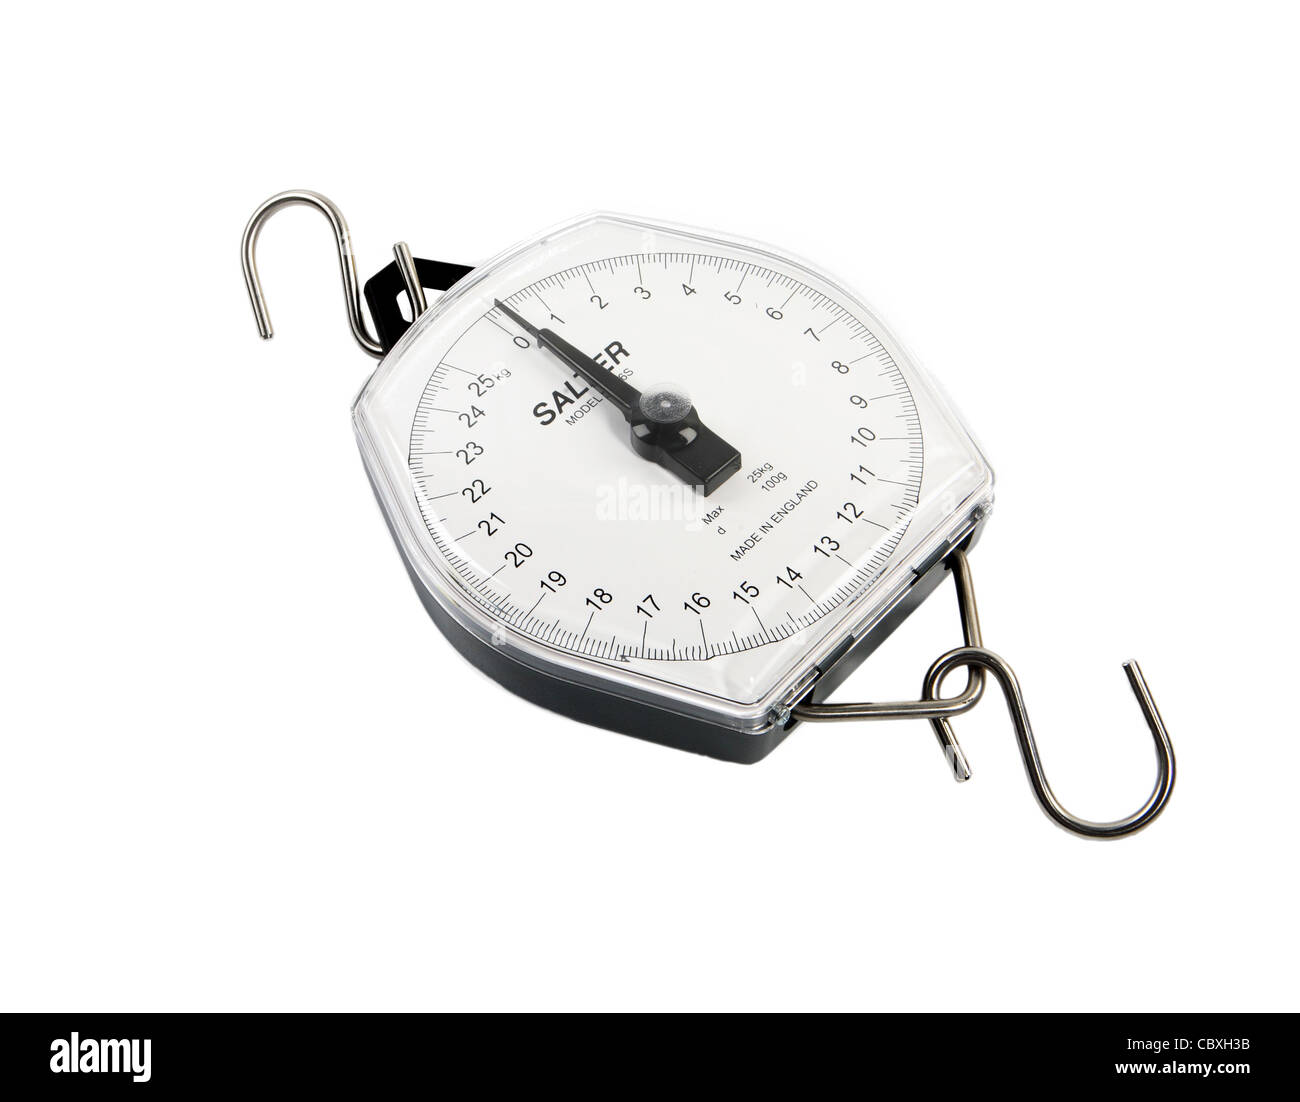 hanging weighing scale Stock Photo - Alamy